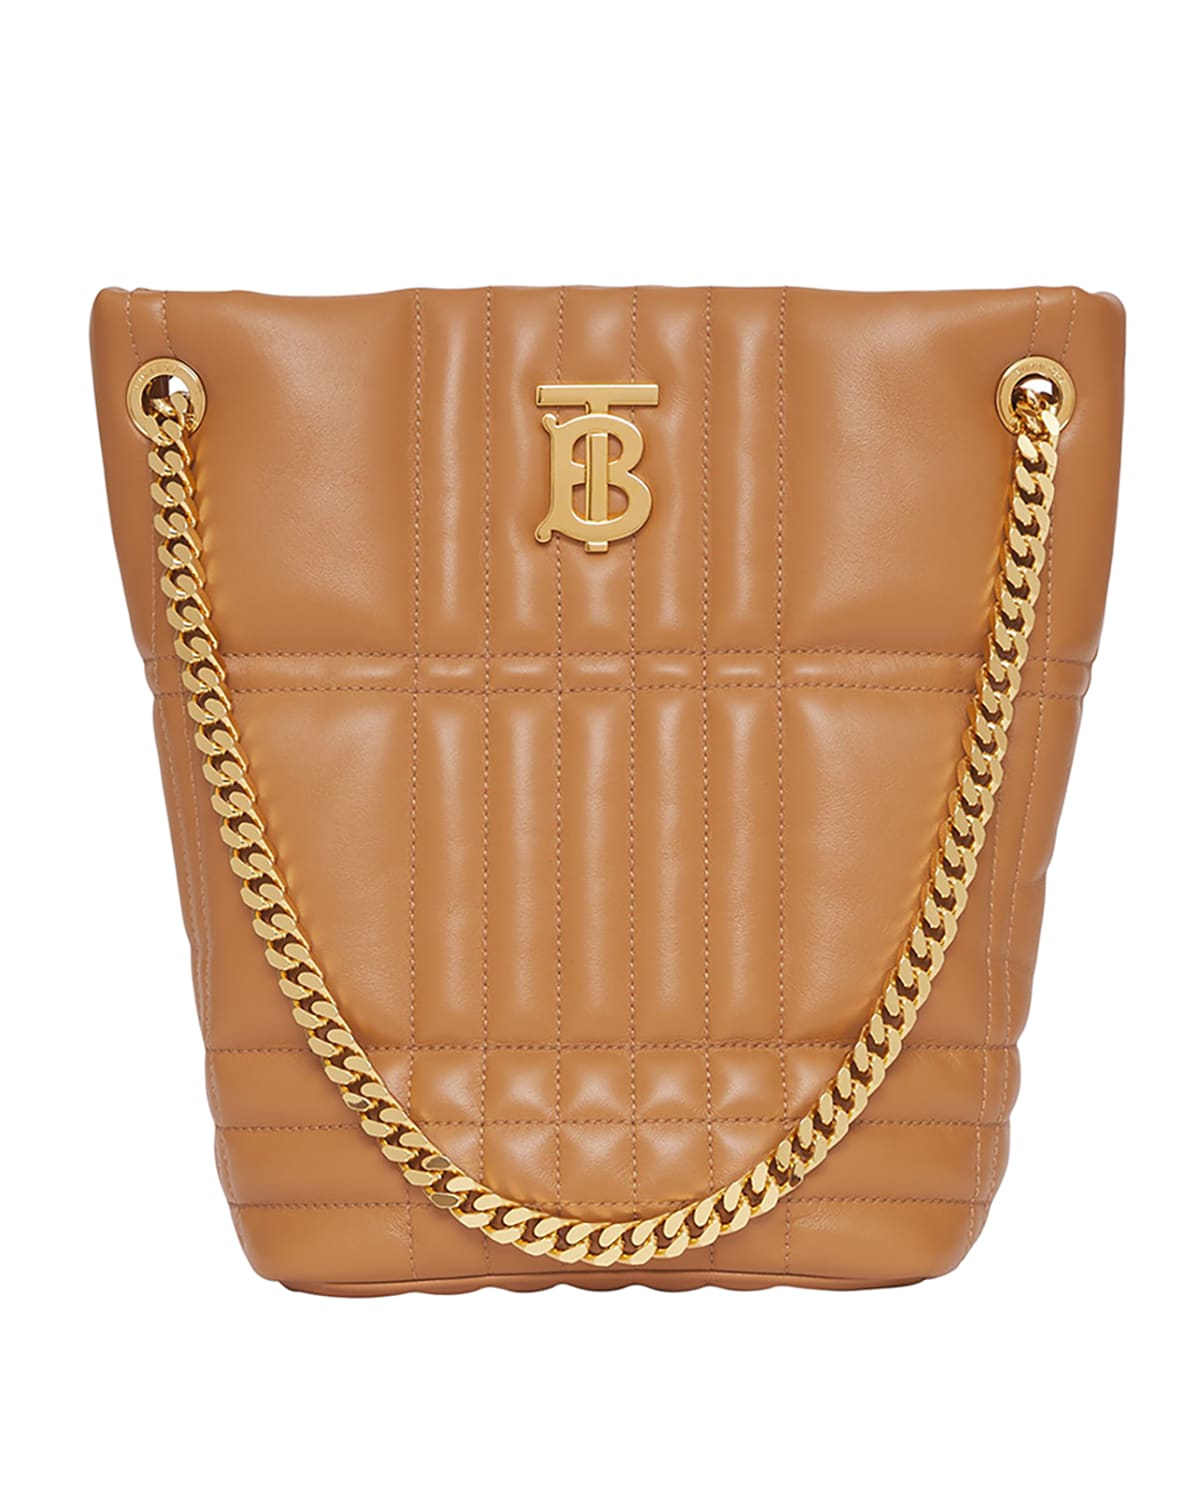 Burberry Lola TB Check Quilted Chain Bucket Bag